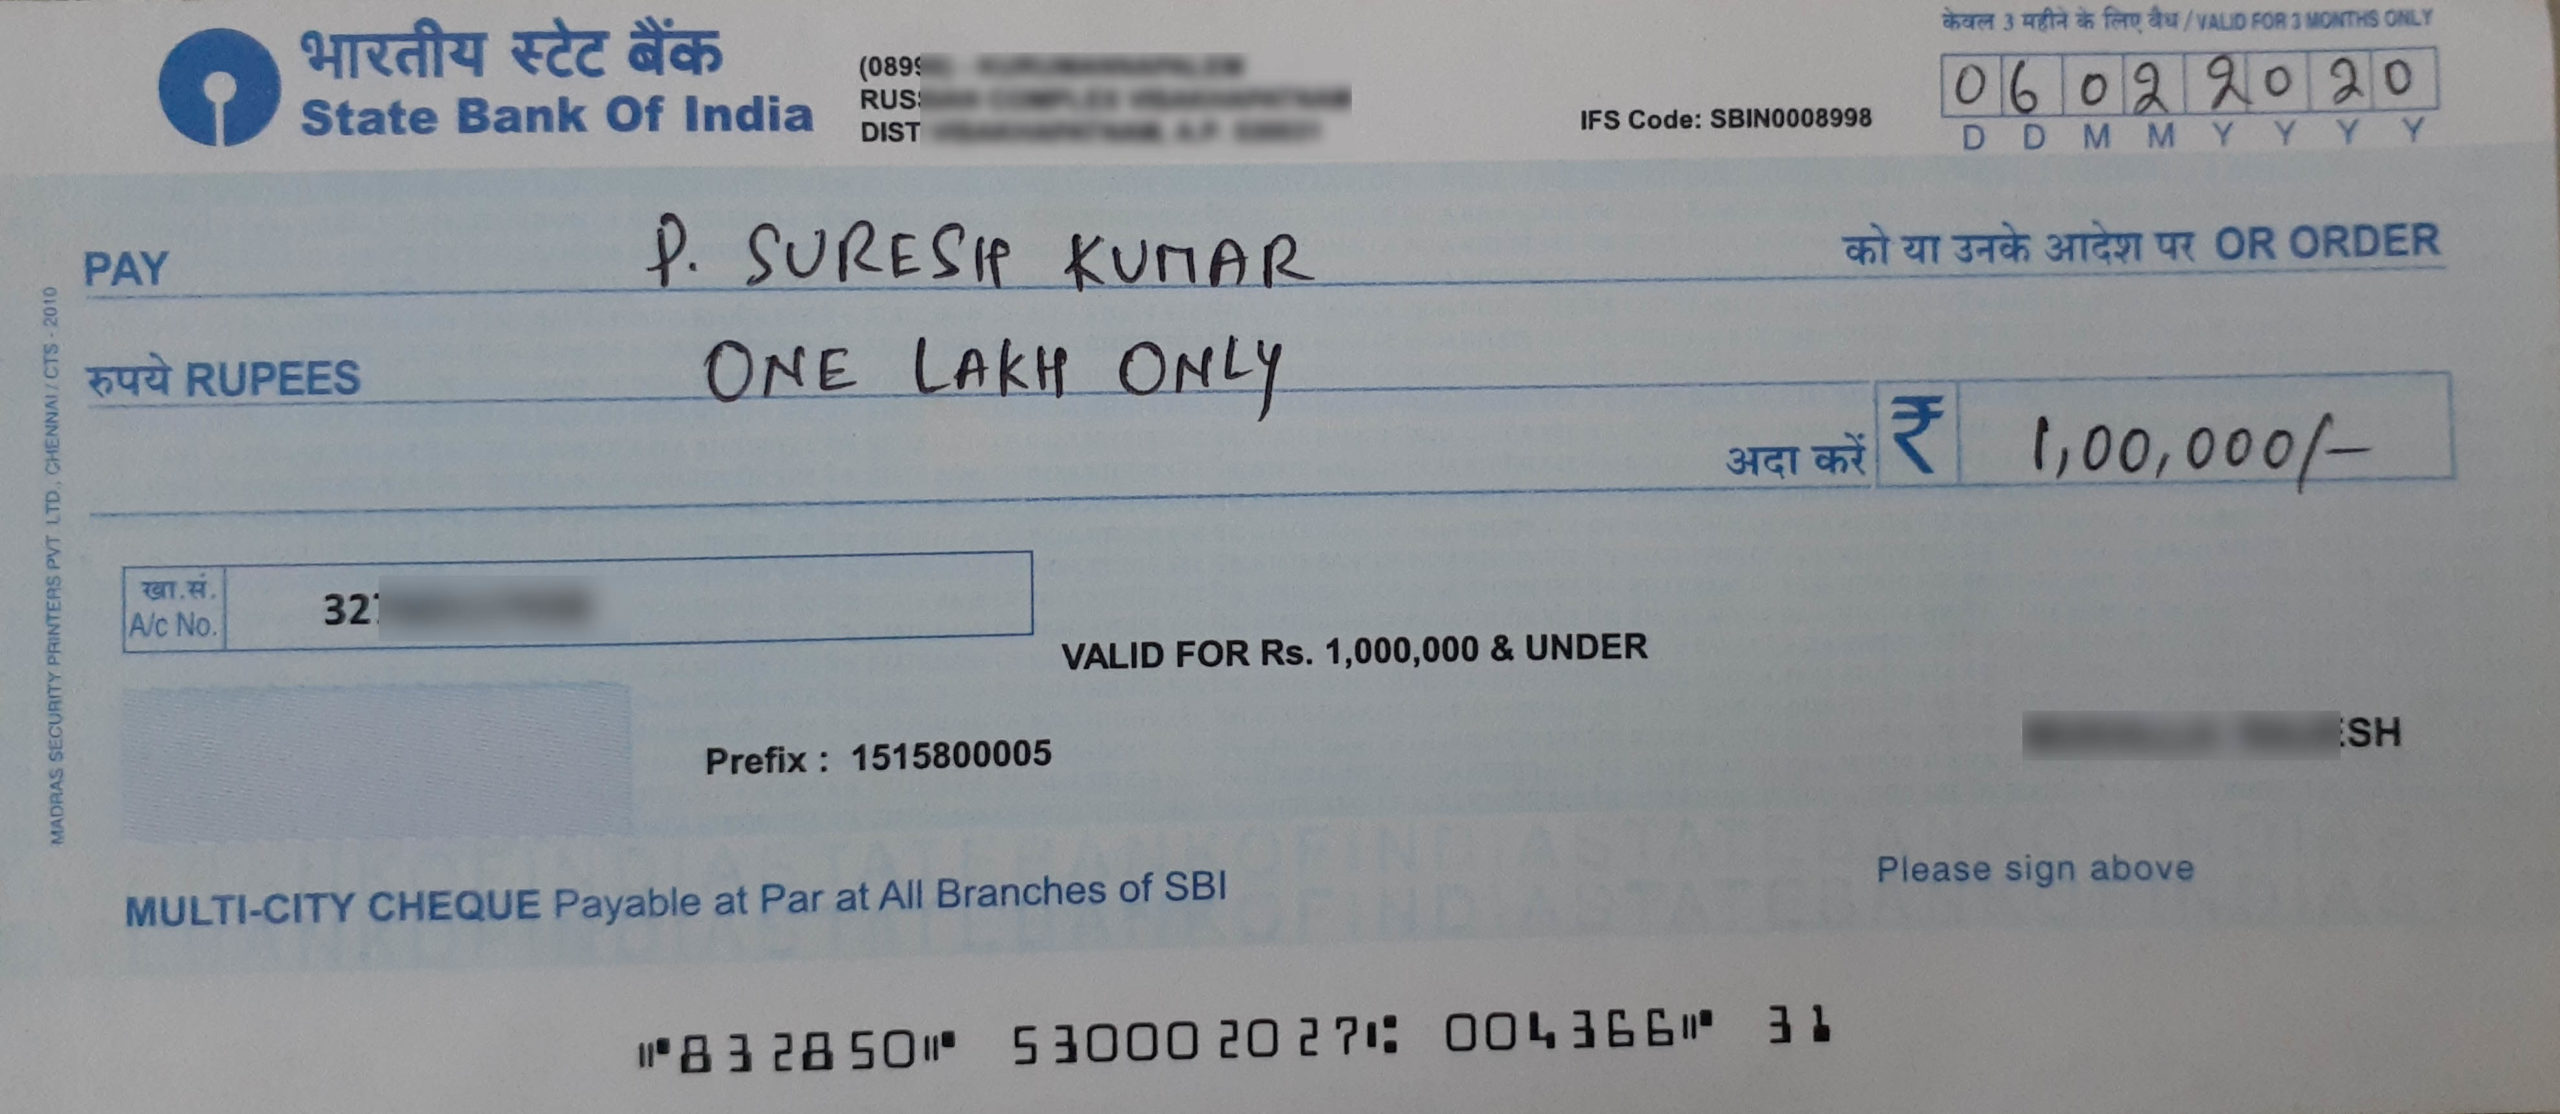 How to Write One Lakh on Cheque in Words